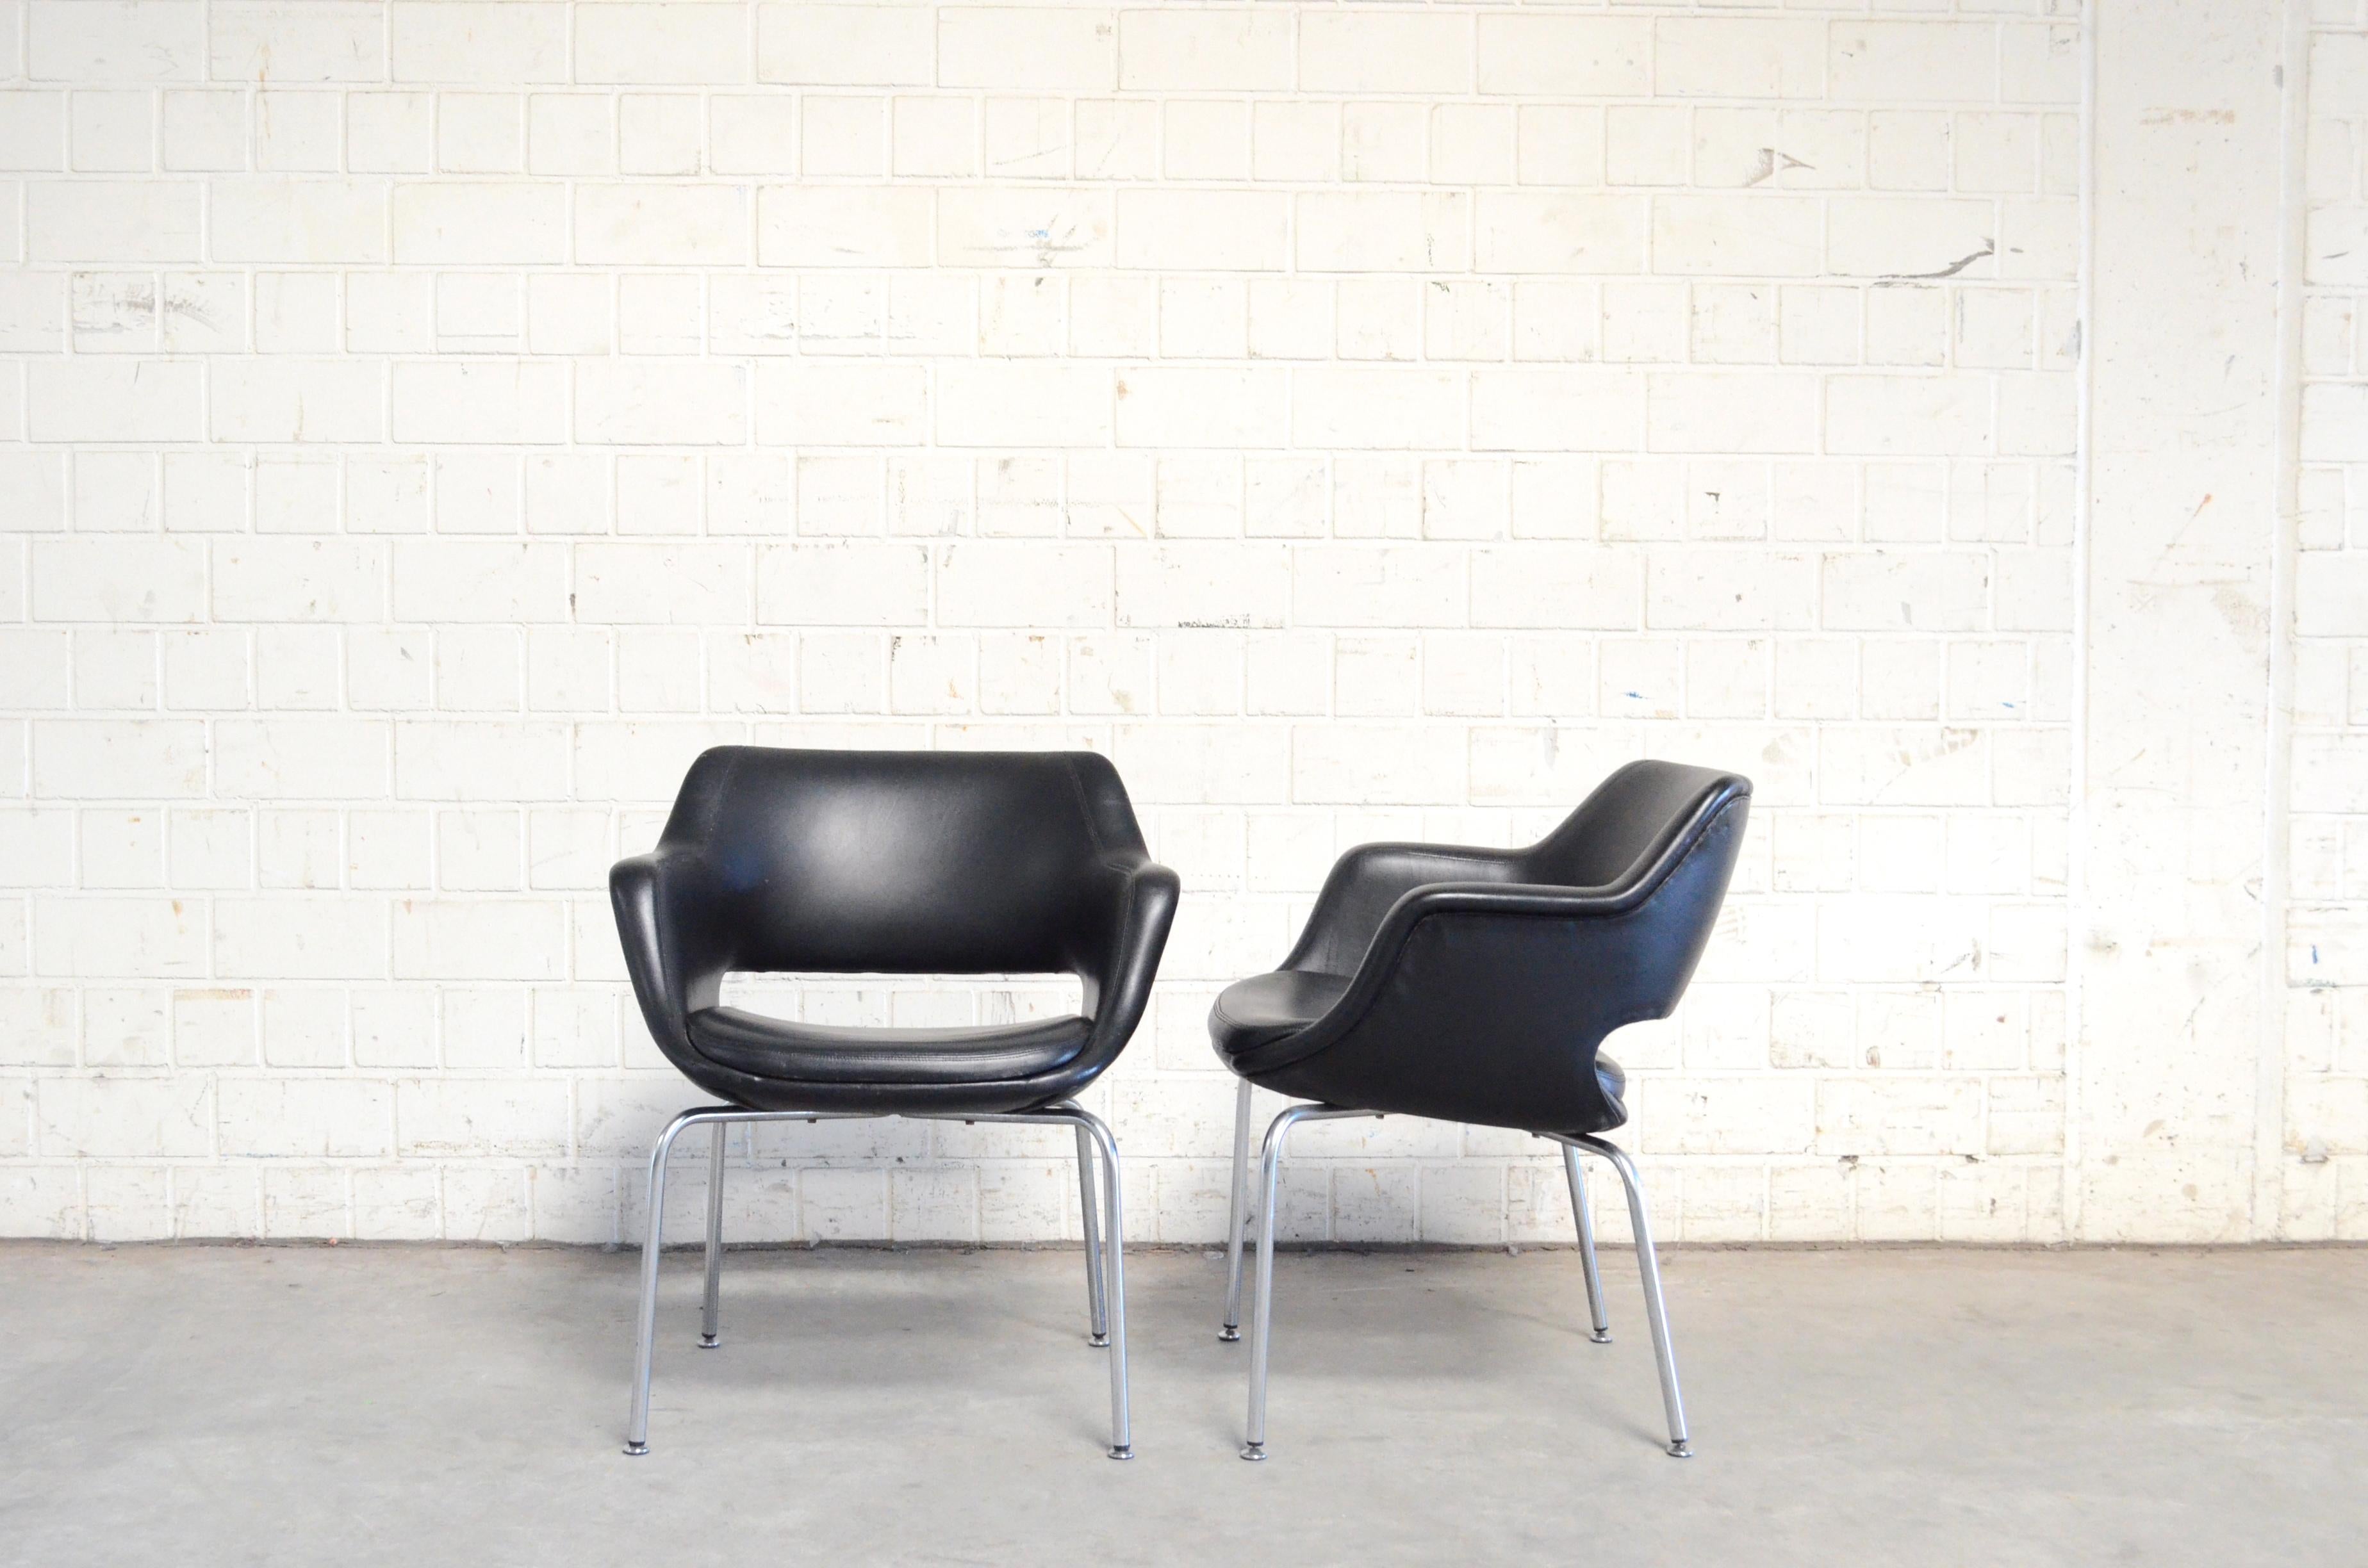 This model Kilta was designed by Finland designer Olli Mannermaa for Martela in 1955.
The Kilta chair is a Finnish design classic. Kilta’s timeless design and comfortable seat guarantee its continuing popularity.
It is a popular vintage product